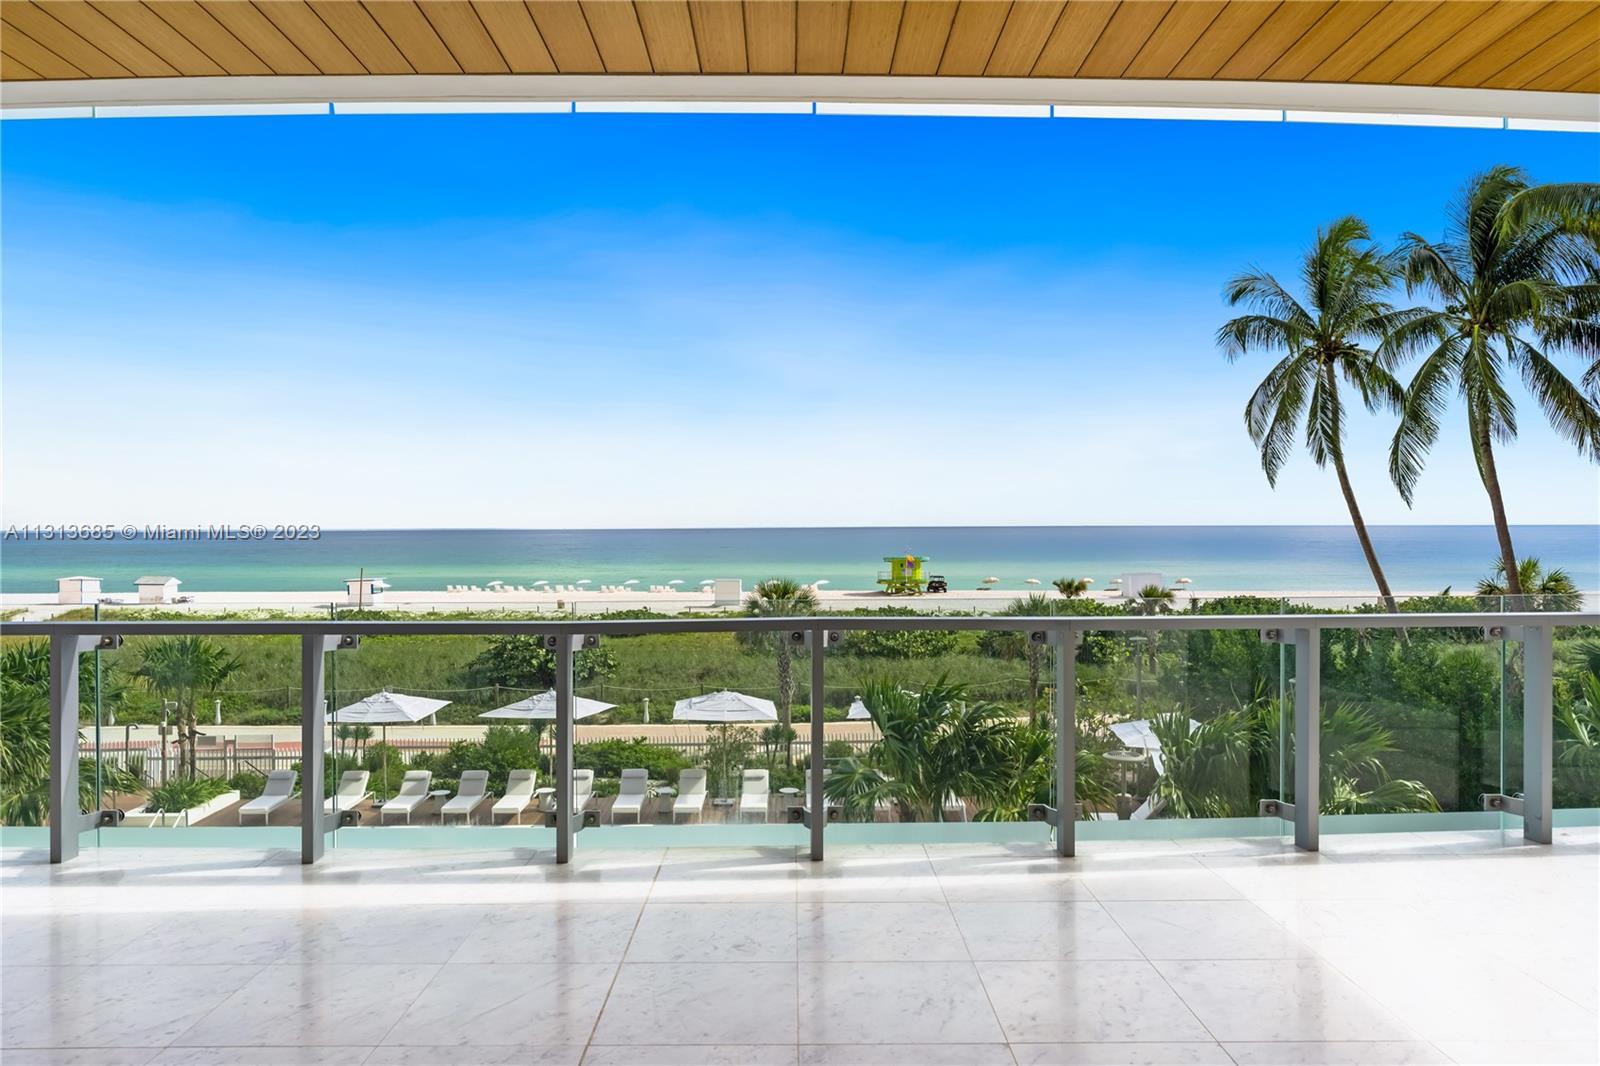 Experience Miami Beach's finest oceanfront living at 57 Ocean, Beach House 1. Sited on the East-South-West corner of this 2021-built condo, this exquisitely finished residence has an excellent floor plan with 2,000-SF of wraparound terraces and squared patio equipped with summer kitchen. A beach lovers' dream home comprising 2,900-SF of luxury interiors finished with marble and wood floors, high ceilings, designer light fixtures, frameless and pocket doors, marble kitchen, and sliding doors that completely open for seamless indoor-outdoor connection - all surrounded with the Atlantic Ocean and swaying palm trees. Oceanfront master suite with 2 built-in closets and luxe bath, 3 guest beds with en-suite baths, walk-in pantry, 3 valet spaces. Indulge on lavish amenities on the beachfront!